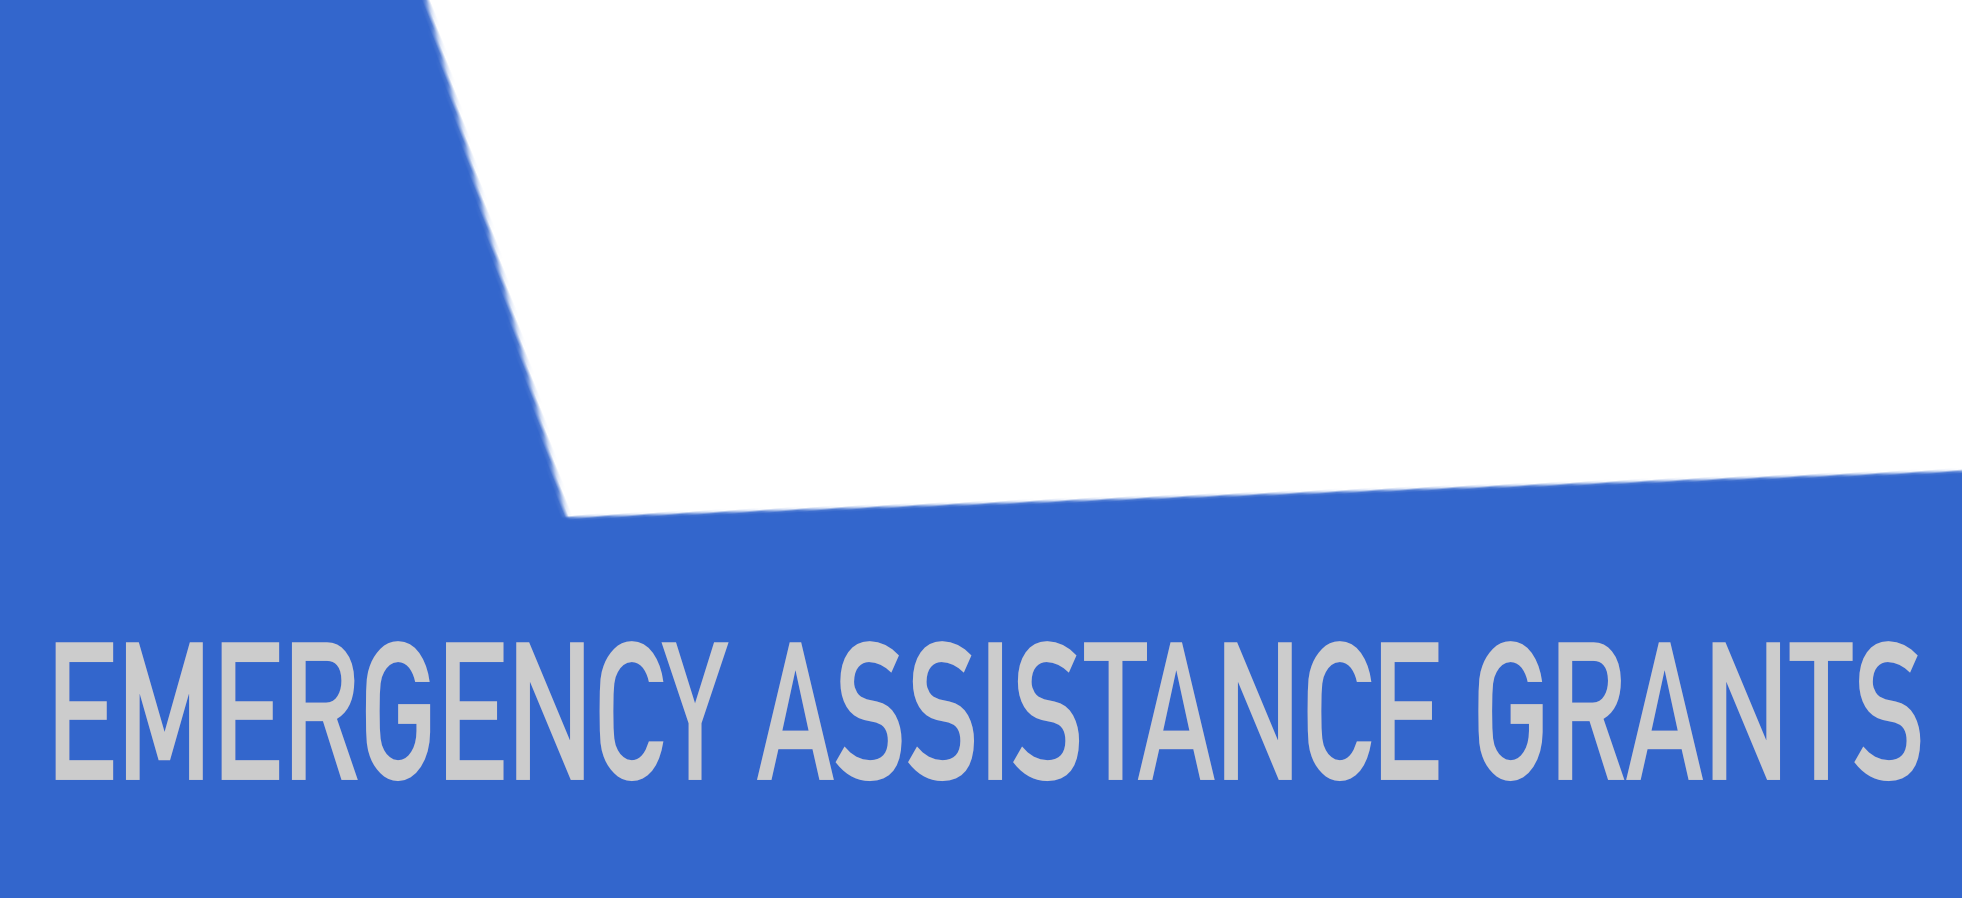 Emergency Assistance Grant